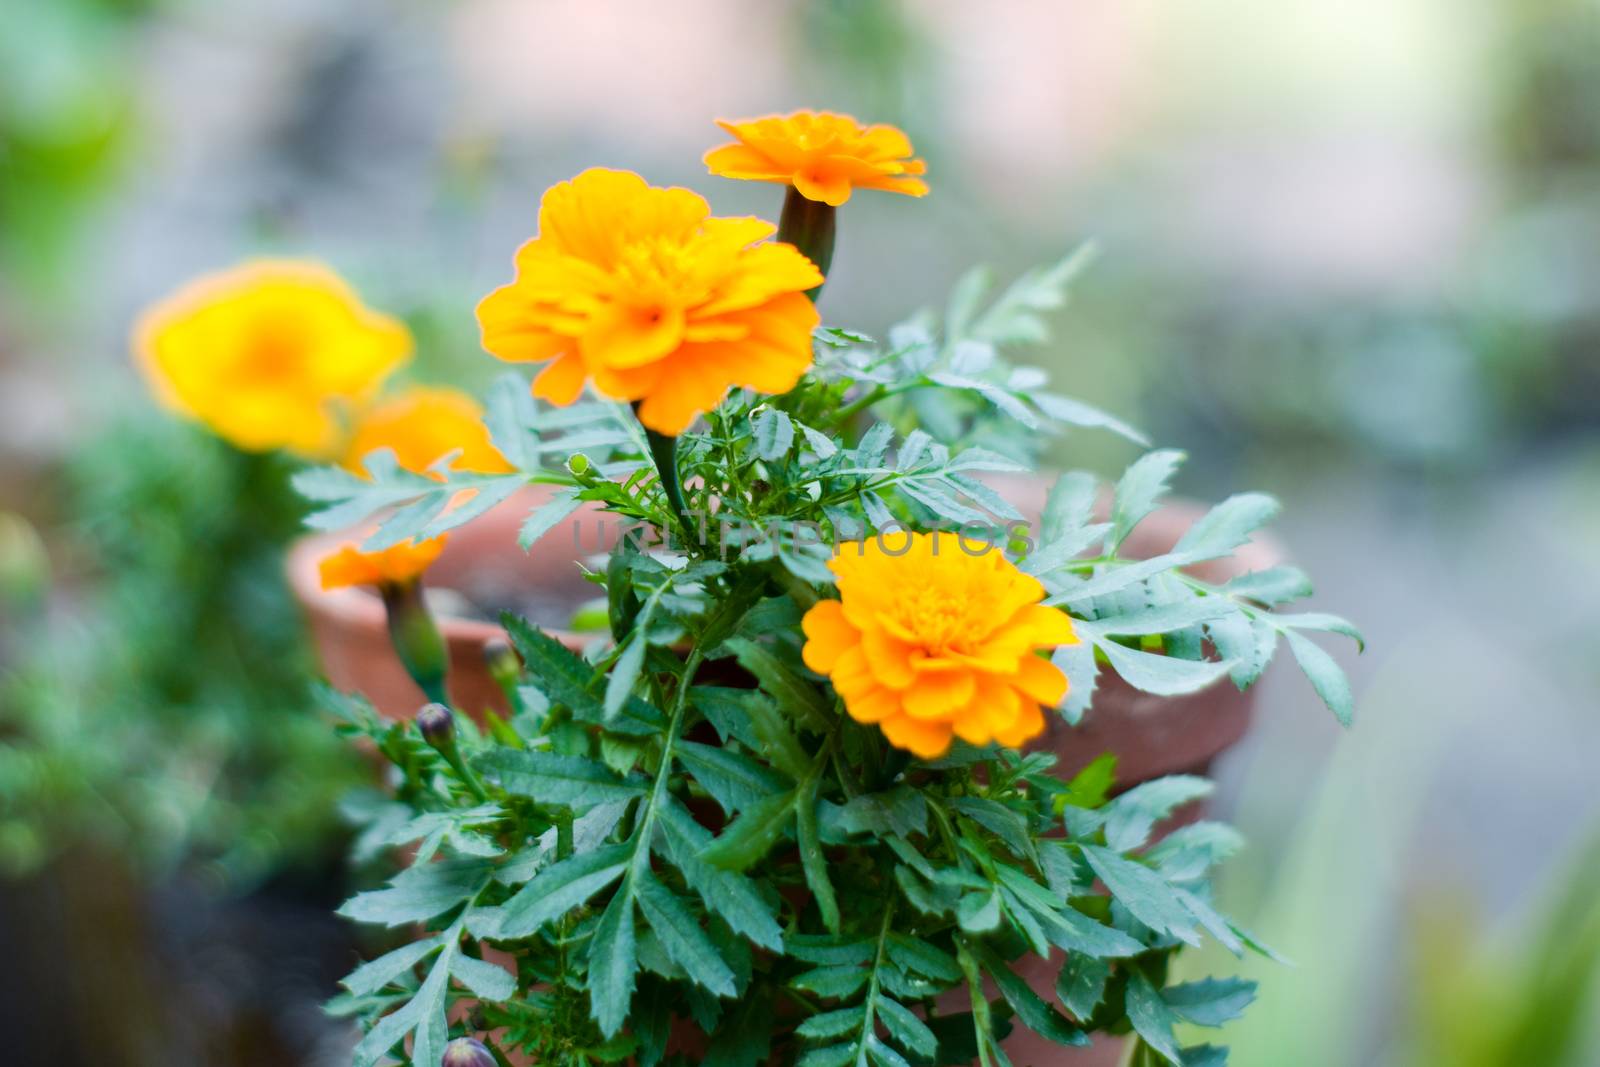 Yellow marigold flowers in sunlight. A Tagetes genus or perennial, mostly herbaceous plants in the sunflower family. Blooms naturally in golden, orange, yellow, white colors, with maroon highlights.